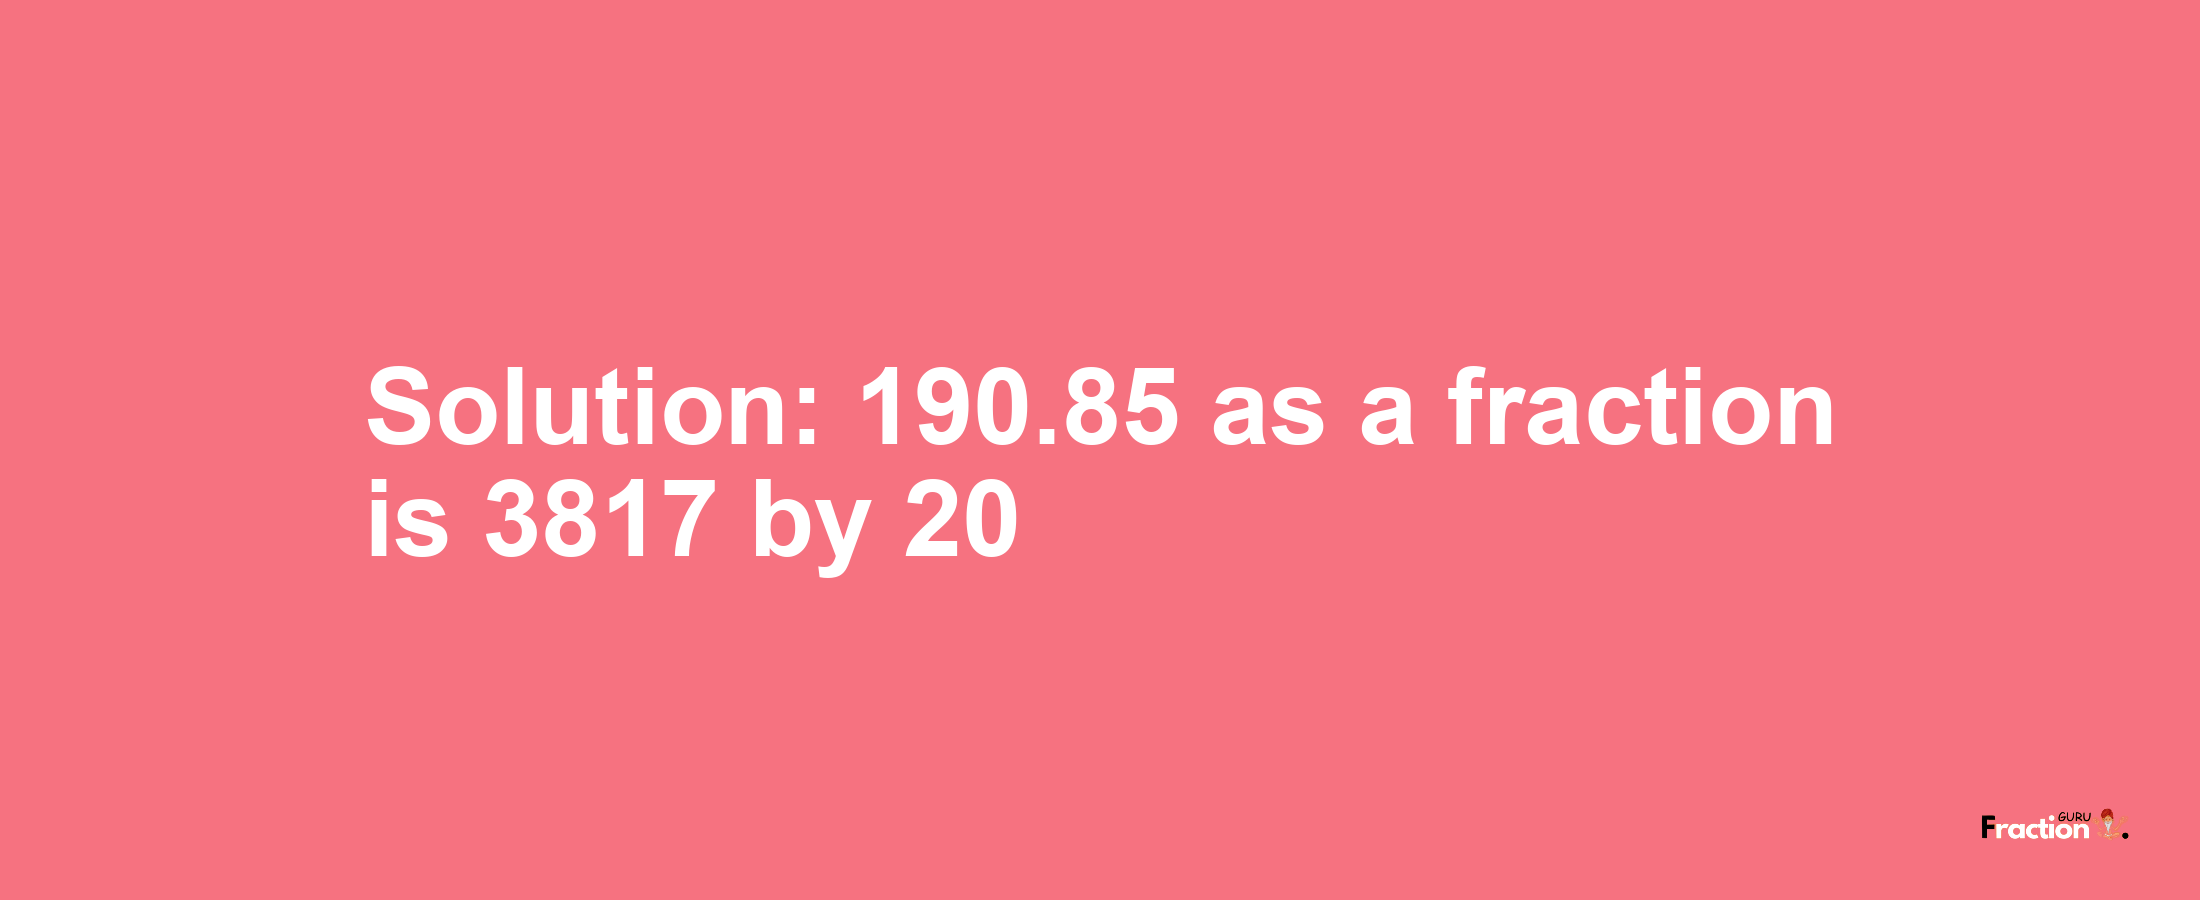 Solution:190.85 as a fraction is 3817/20